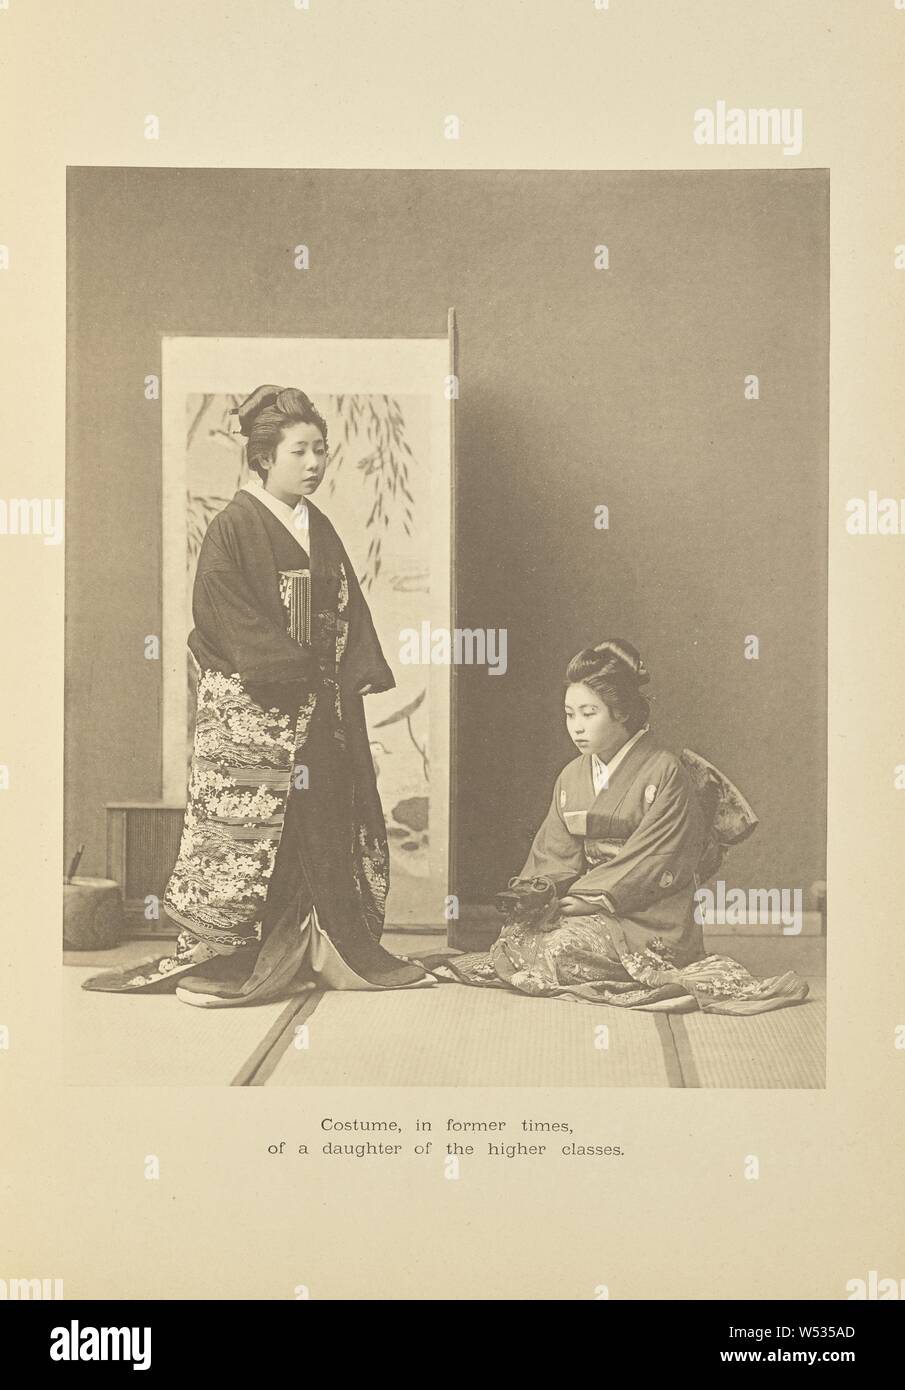 Costume, in Former Times, of a Daughter of the Higher Class, Kazumasa Ogawa (Japanese, 1860 - 1929), Tokyo, Japan, 1893–1895, Collotype, 24.3 × 20.2 cm (9 9/16 × 7 15/16 in Stock Photo